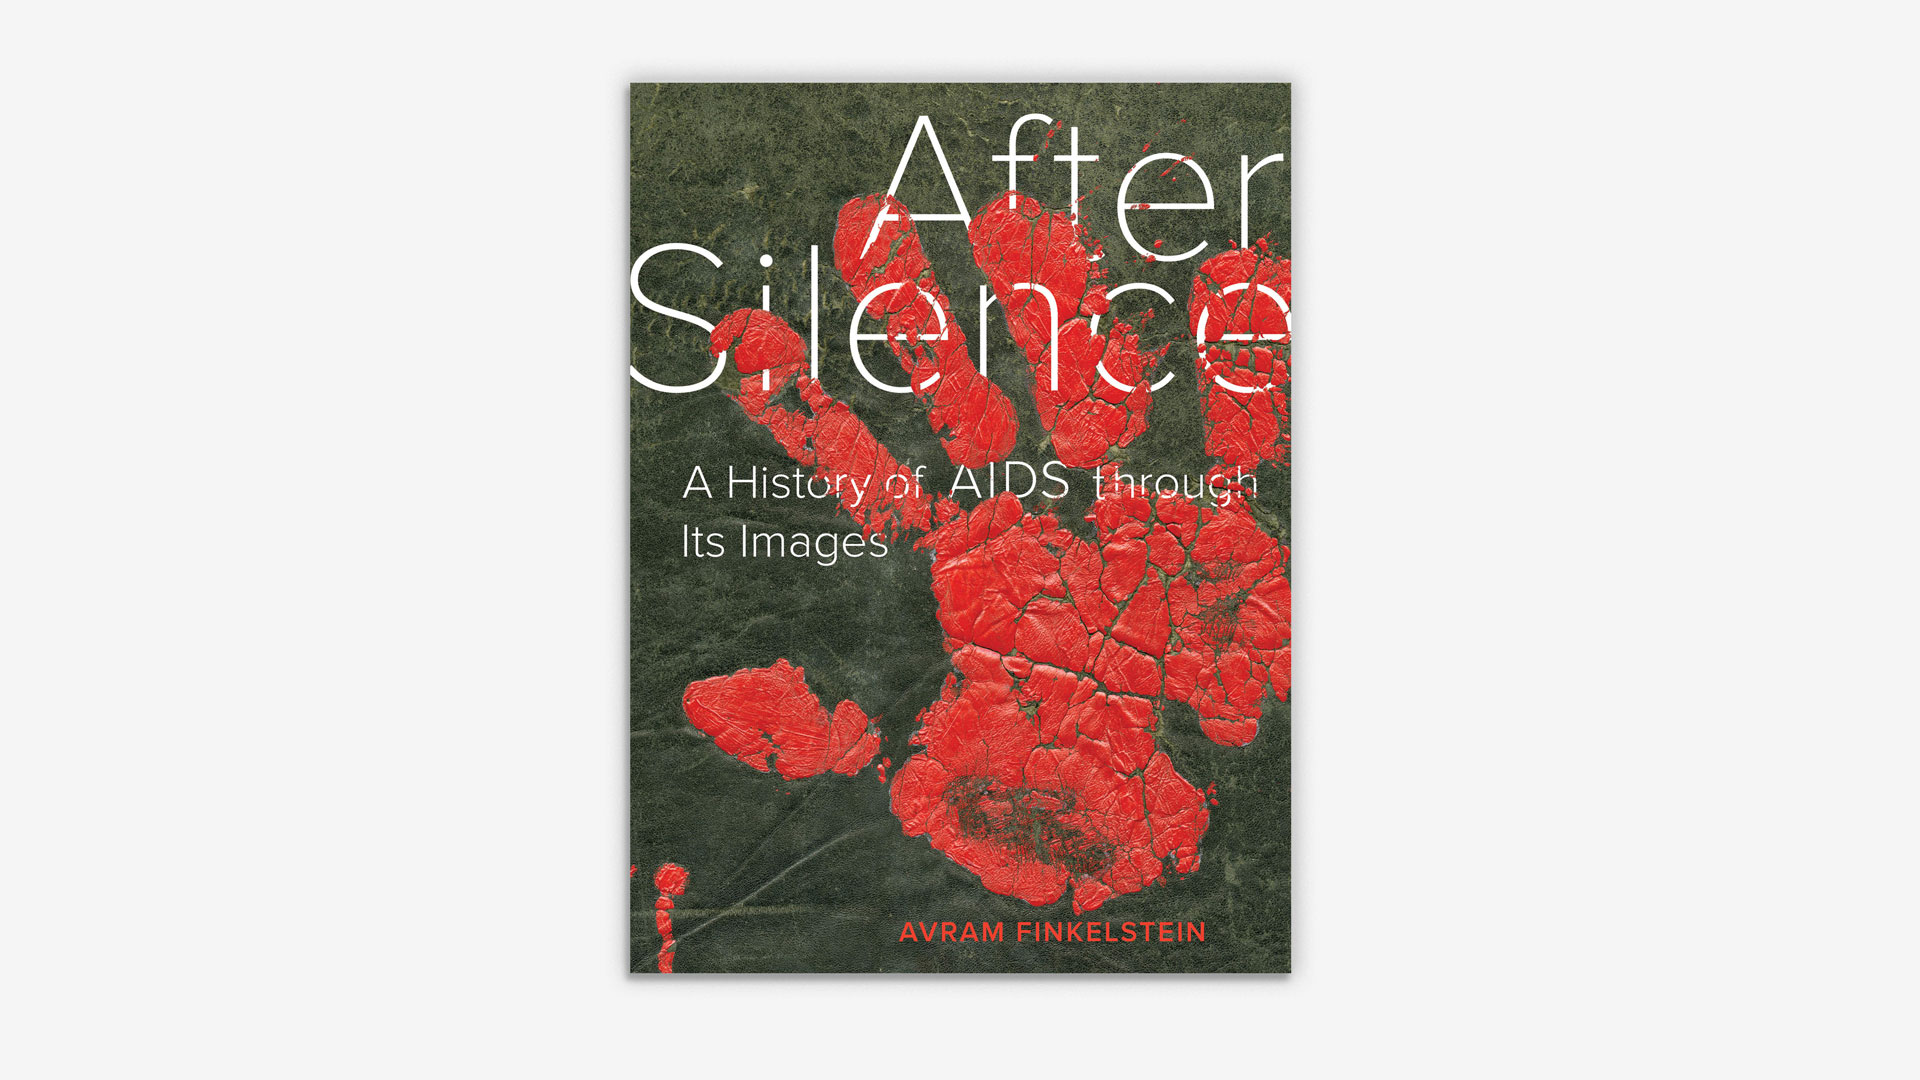 Avram Finkelstein „After Silence: A History of AIDS through Its Images“